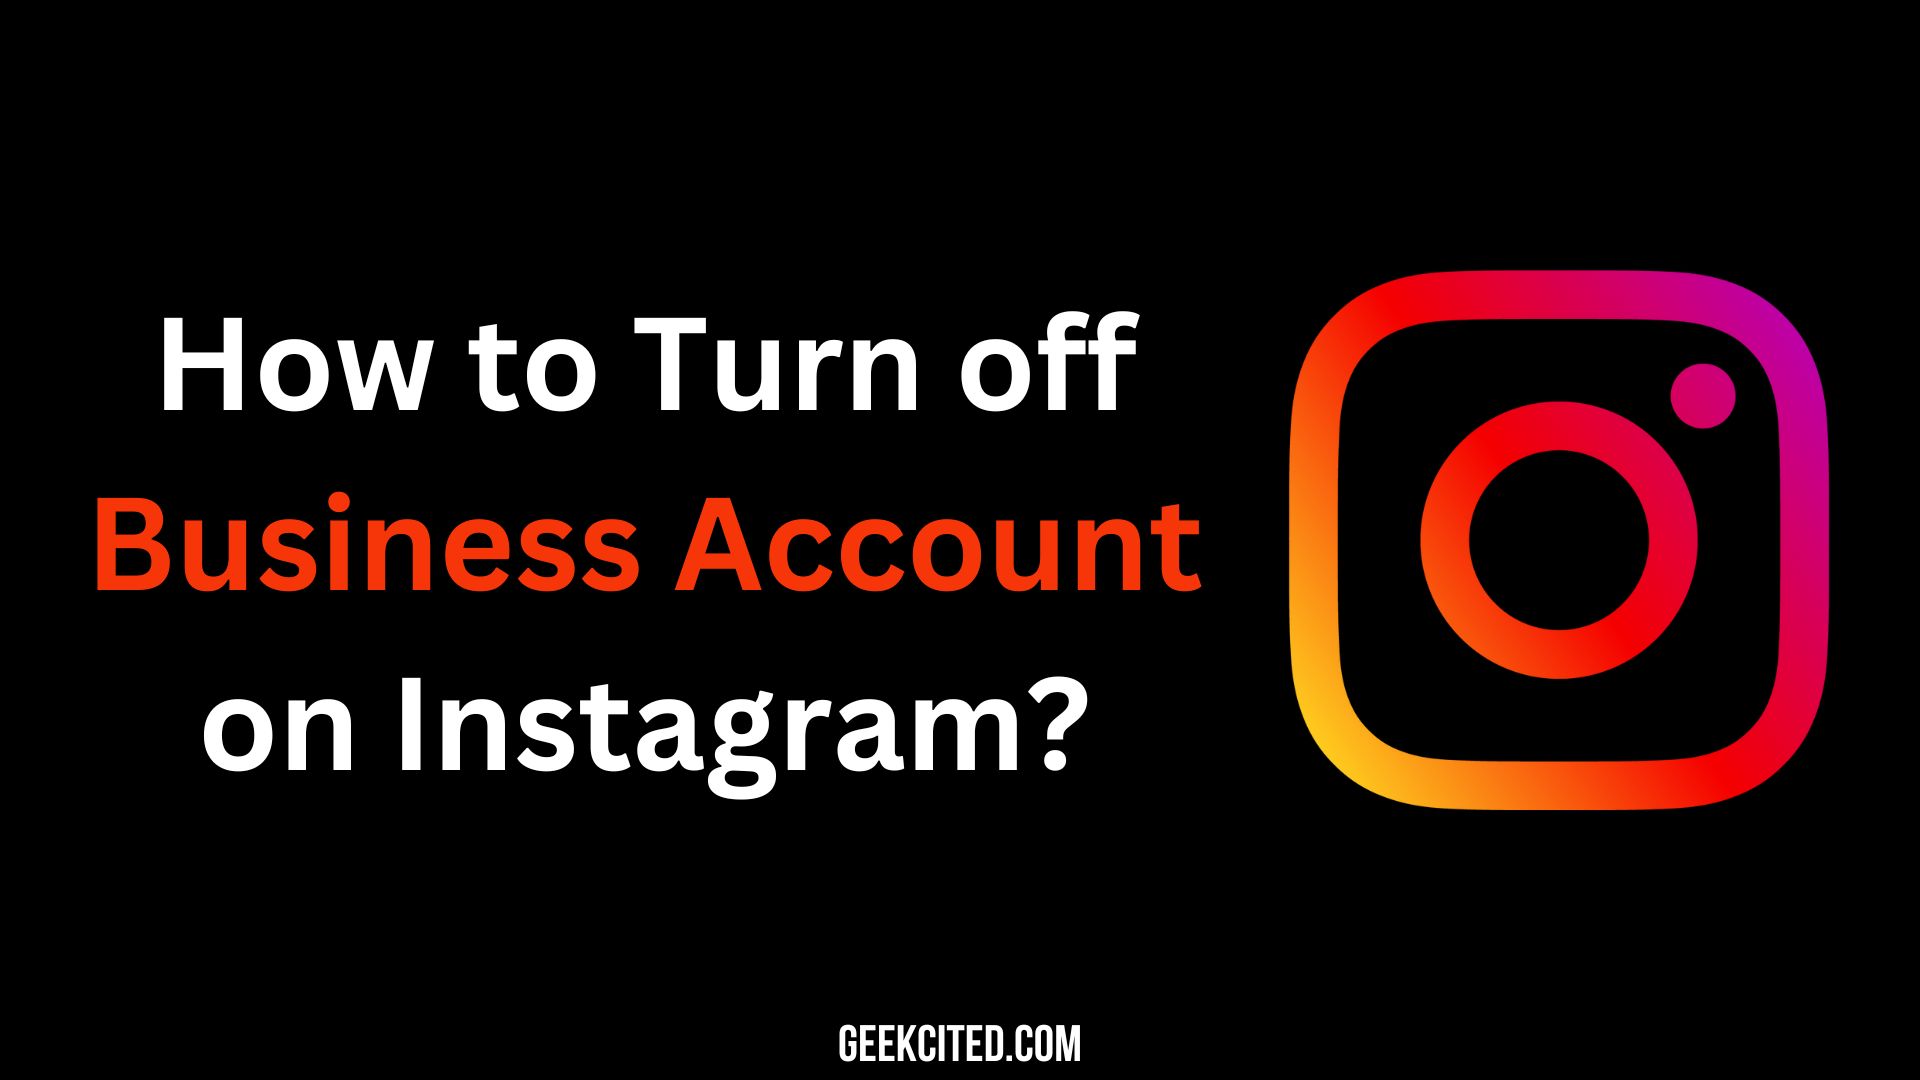 How to Turn off Business Account on Instagram